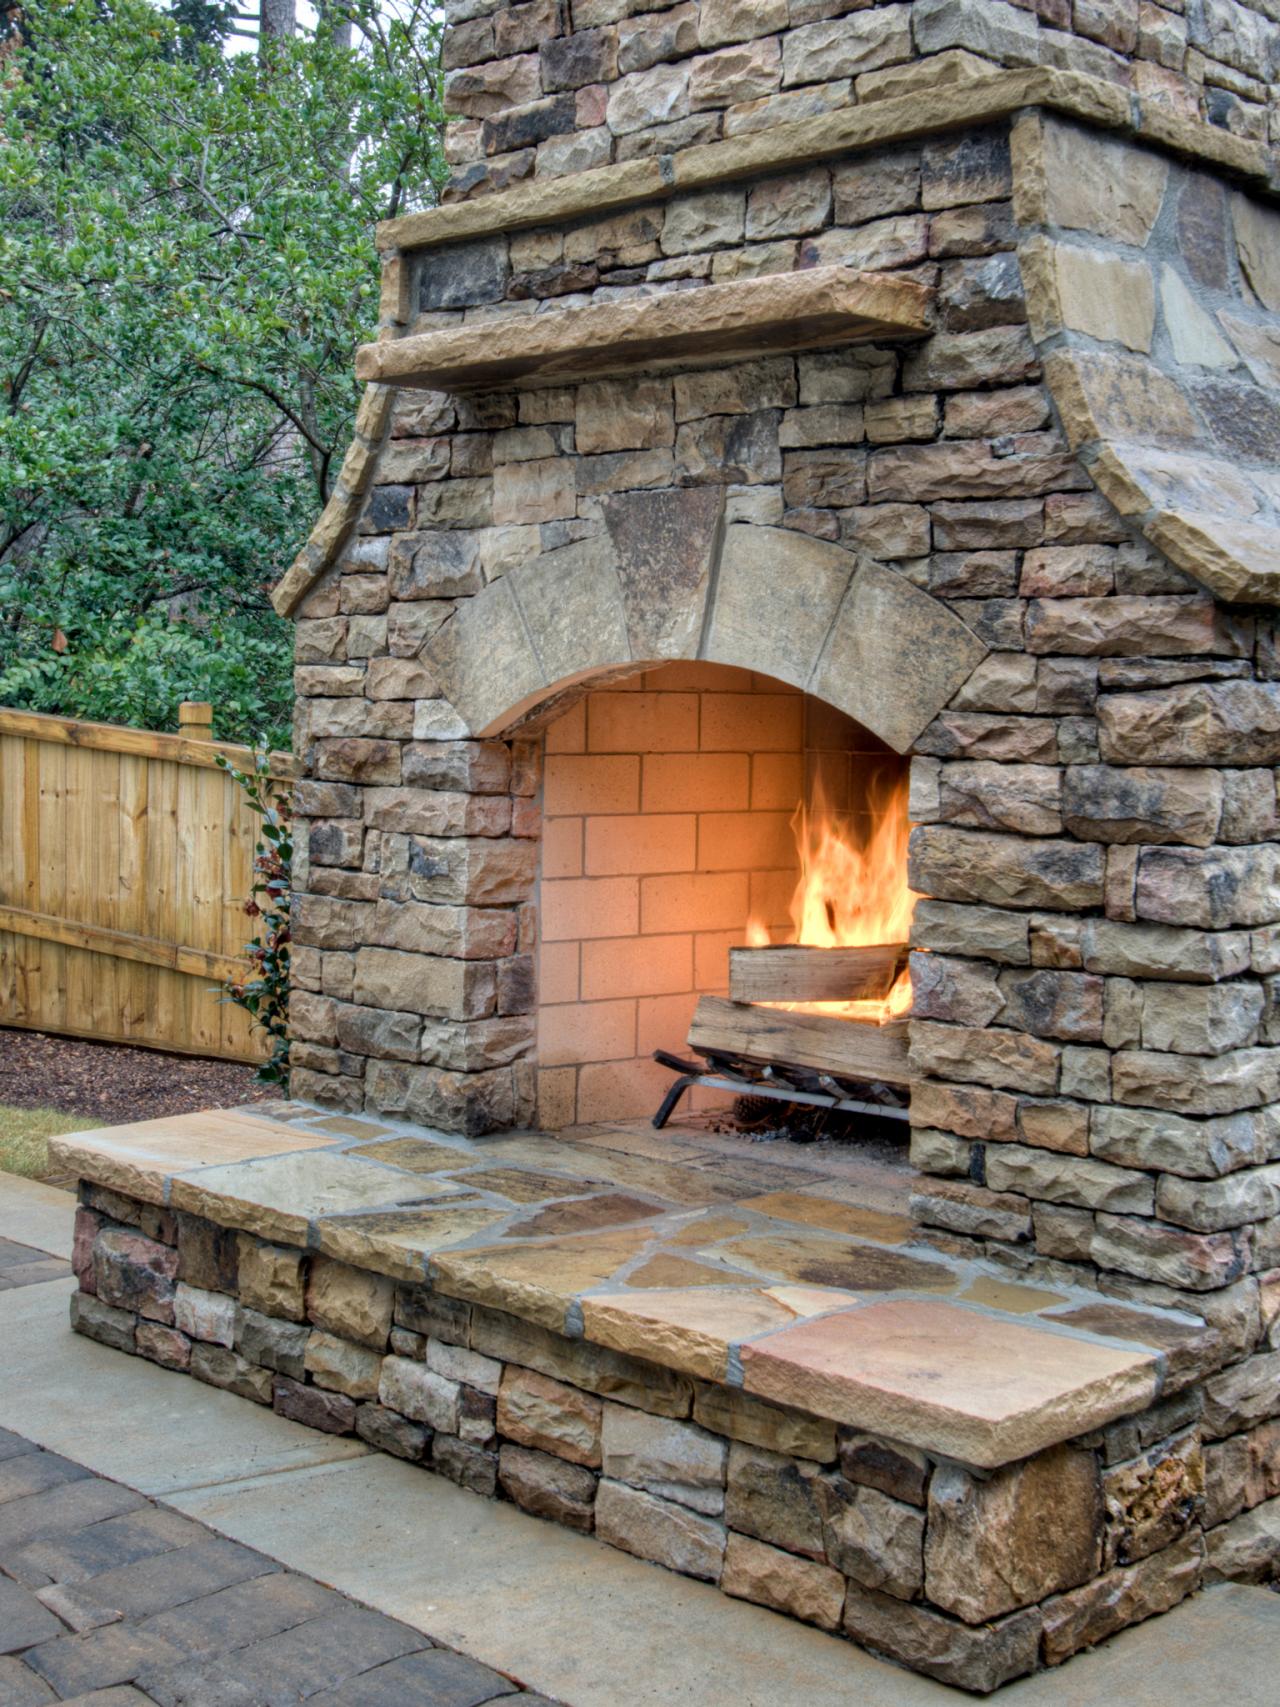 How To Build An Outdoor Fireplace, How Many Bricks Do I Need To Build An Outdoor Fireplace